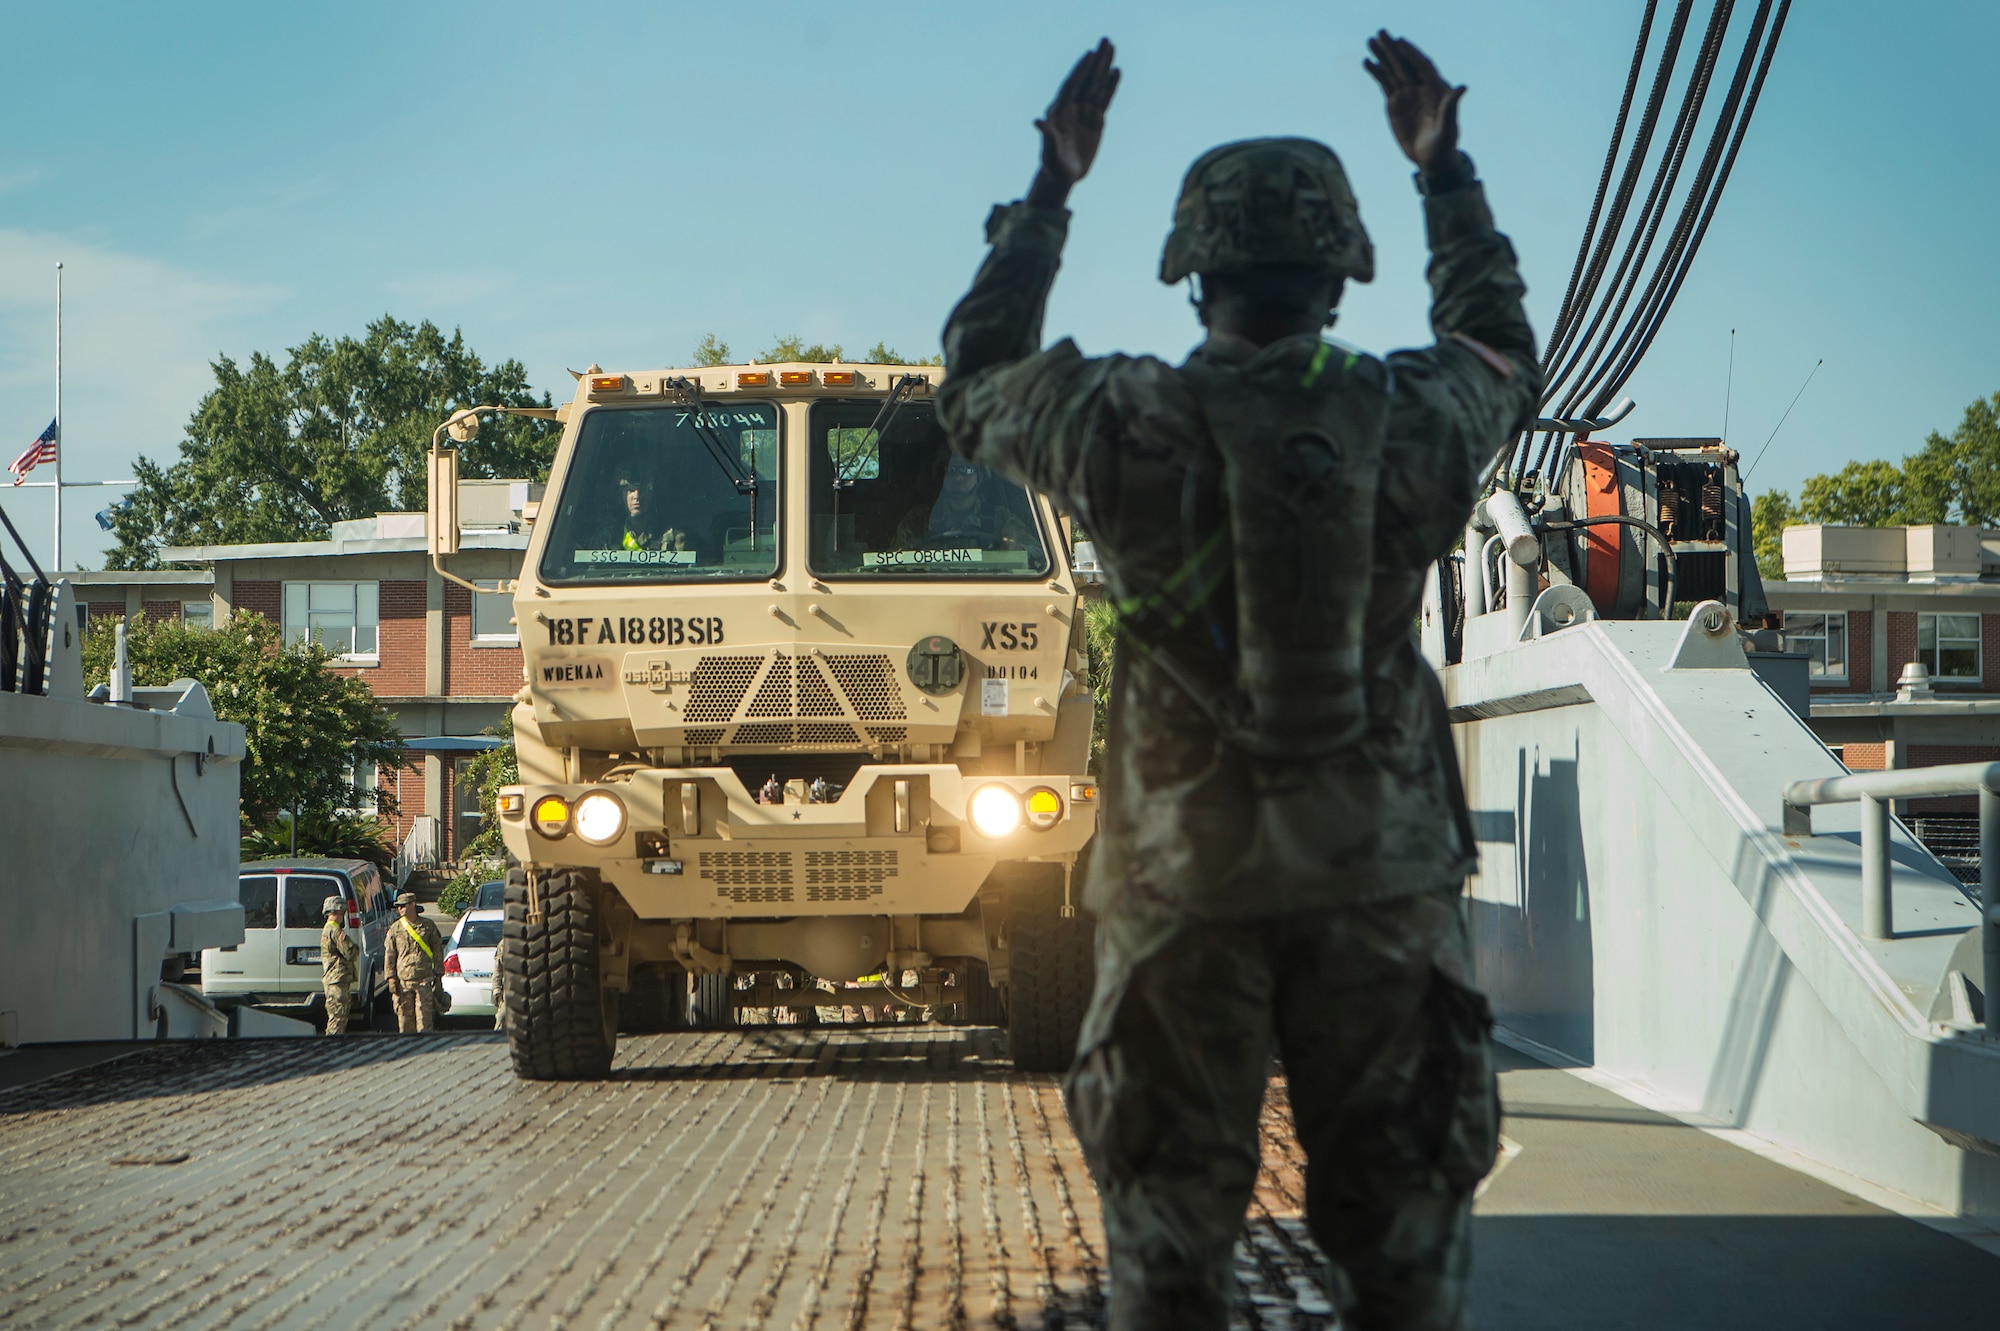 U.S. Army Staff Sgt. Conrad Stewart, a motor transport operator assigned to the 18th Field Artillery Brigade, 188th Brigade Support Battalion from Fort Bragg, N.C., directs army vehicles onto Logistics Naval Vessel Cape Decision during Exercise Dragon Lifeline Aug. 7, 2019, at the Federal Law enforcement Training Center in Charleston, S.C. The deployment readiness exercise combined the capabilities of service members from Fort Bragg, N.C., Joint Base Charleston, S.C., and Joint Base Langley-Eustis, Va., focused on the rapid deployment of equipment, vehicles and personnel. Participants shared knowledge and tested their efficiency in moving assets by air, land, rail and sea during the training event. The annual exercise is just one of the critical readiness exercises the DOD conducts to maintain a lethal and ready force. (U.S. Air Force photo by Tech. Sgt. Christopher Hubenthal)